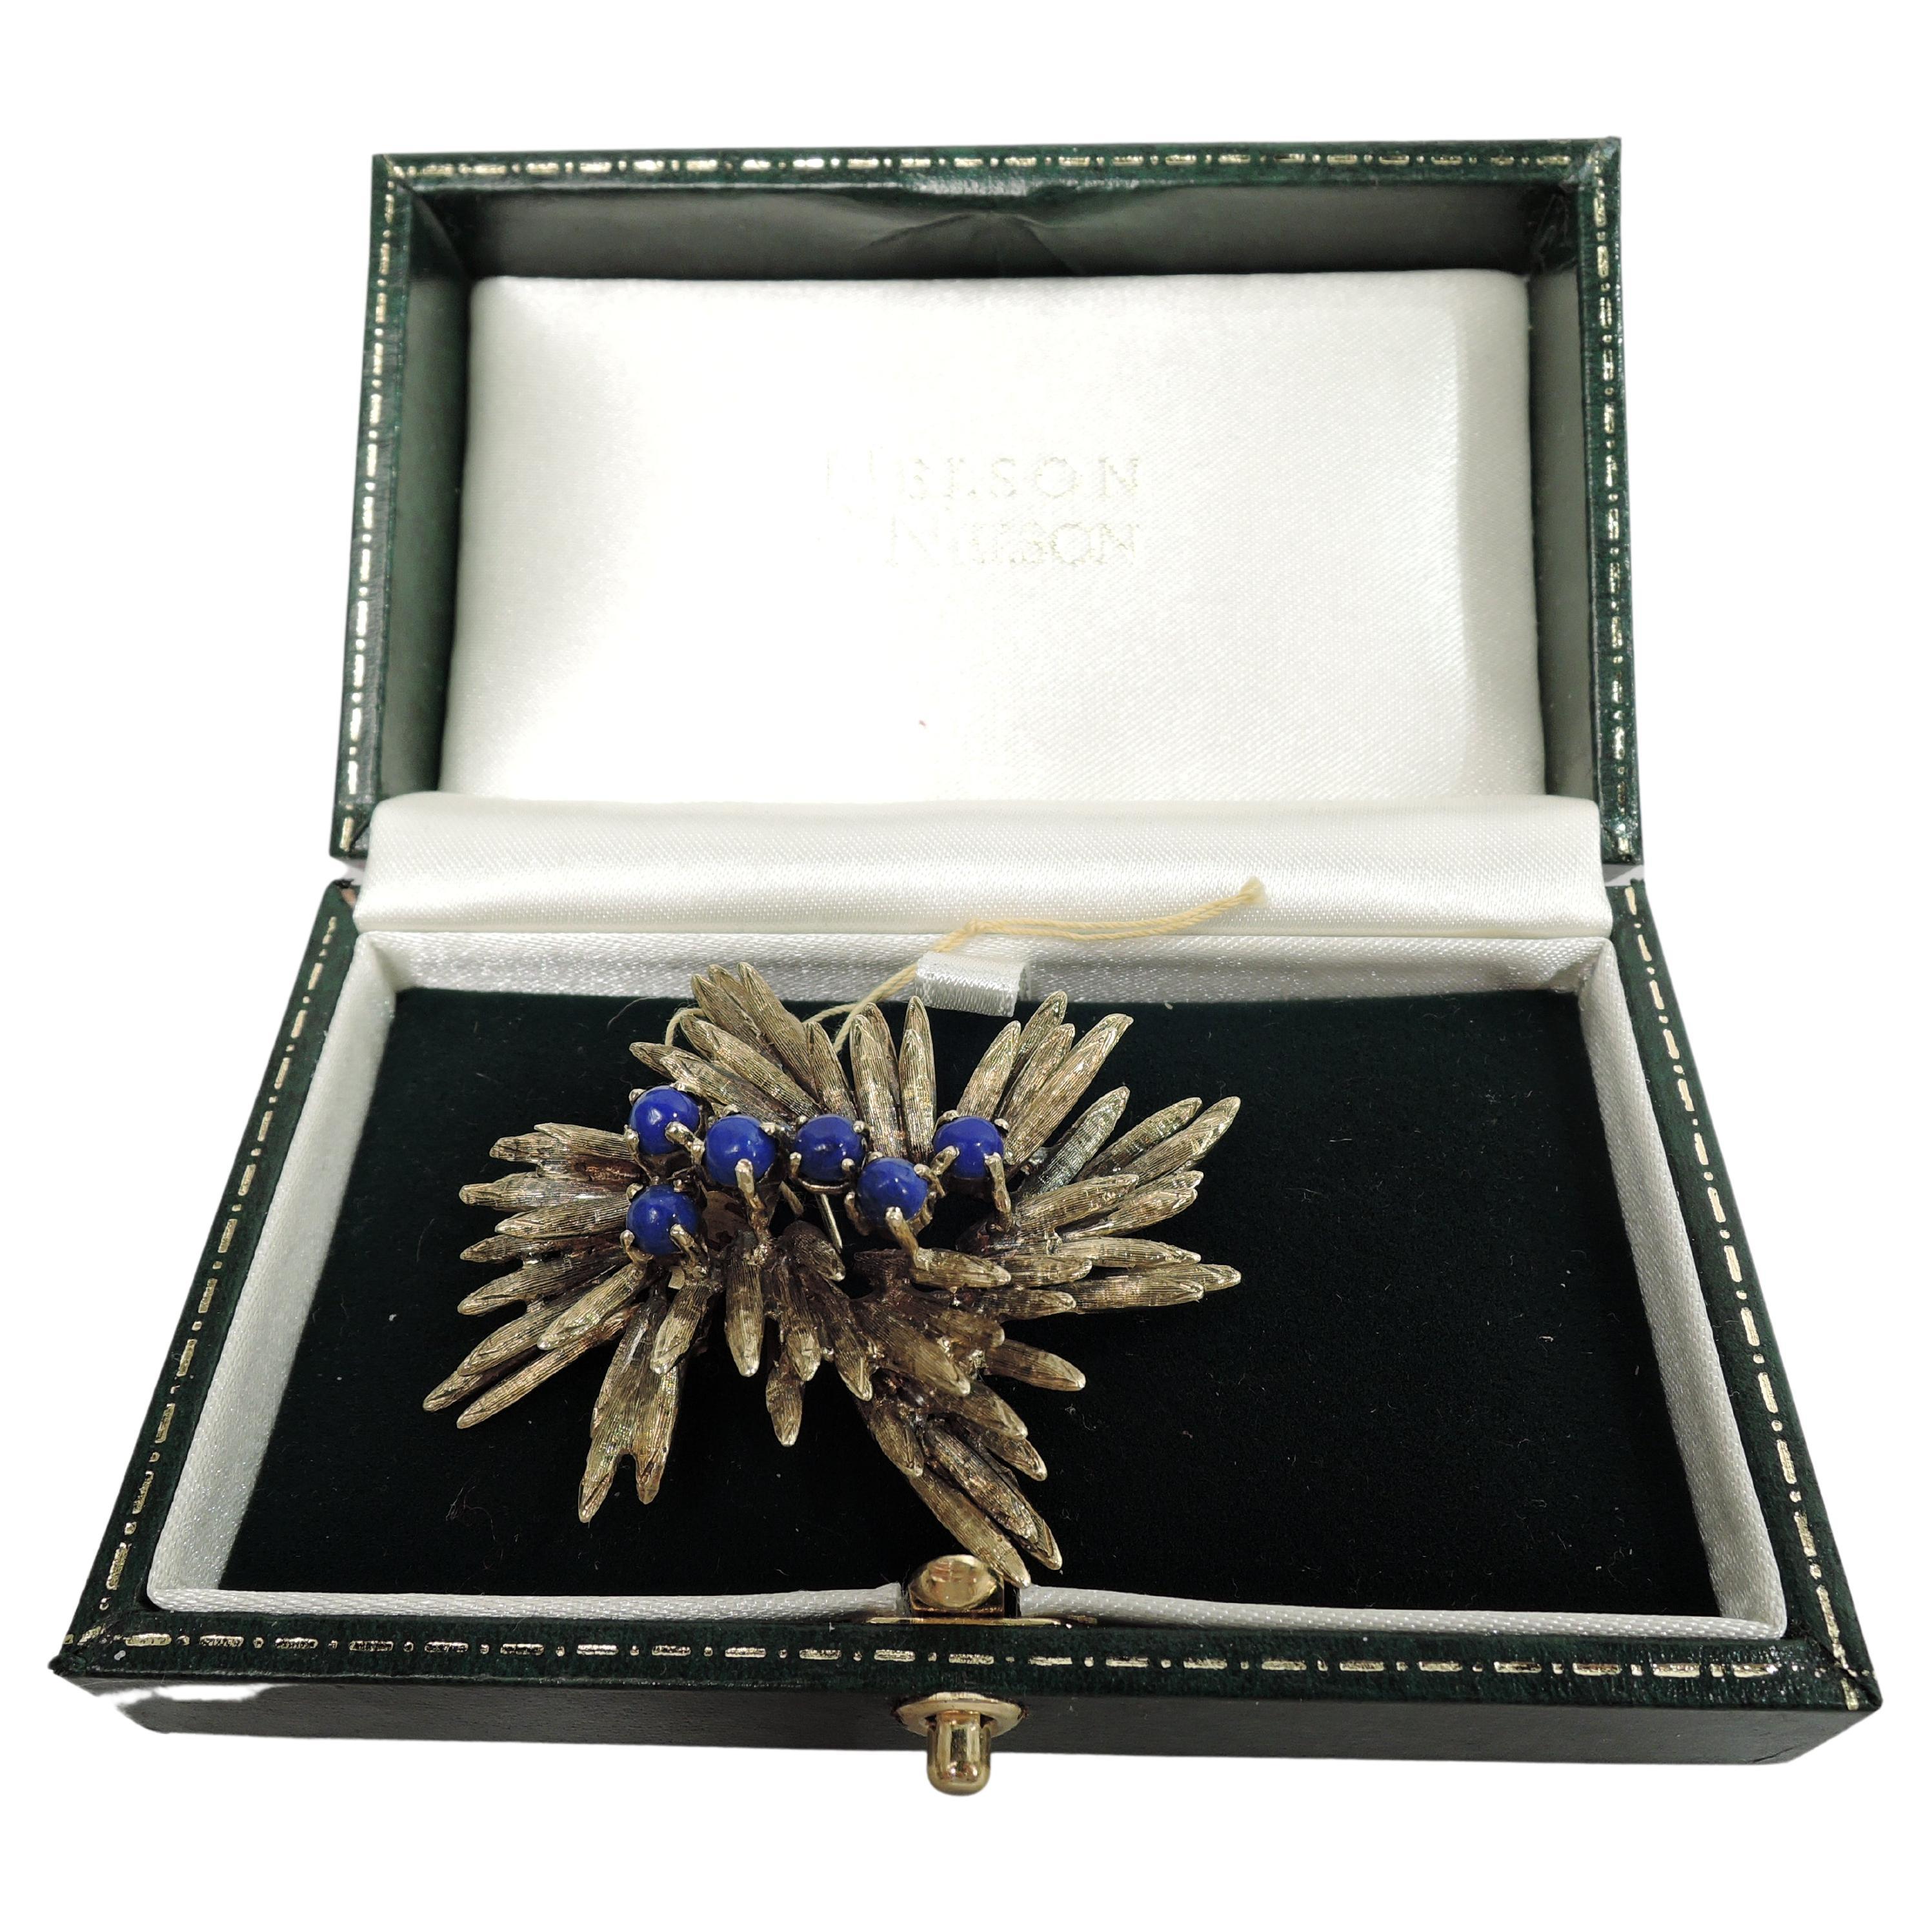 American Midcentury Modern Gold and Lapis Lazuli Brooch For Sale